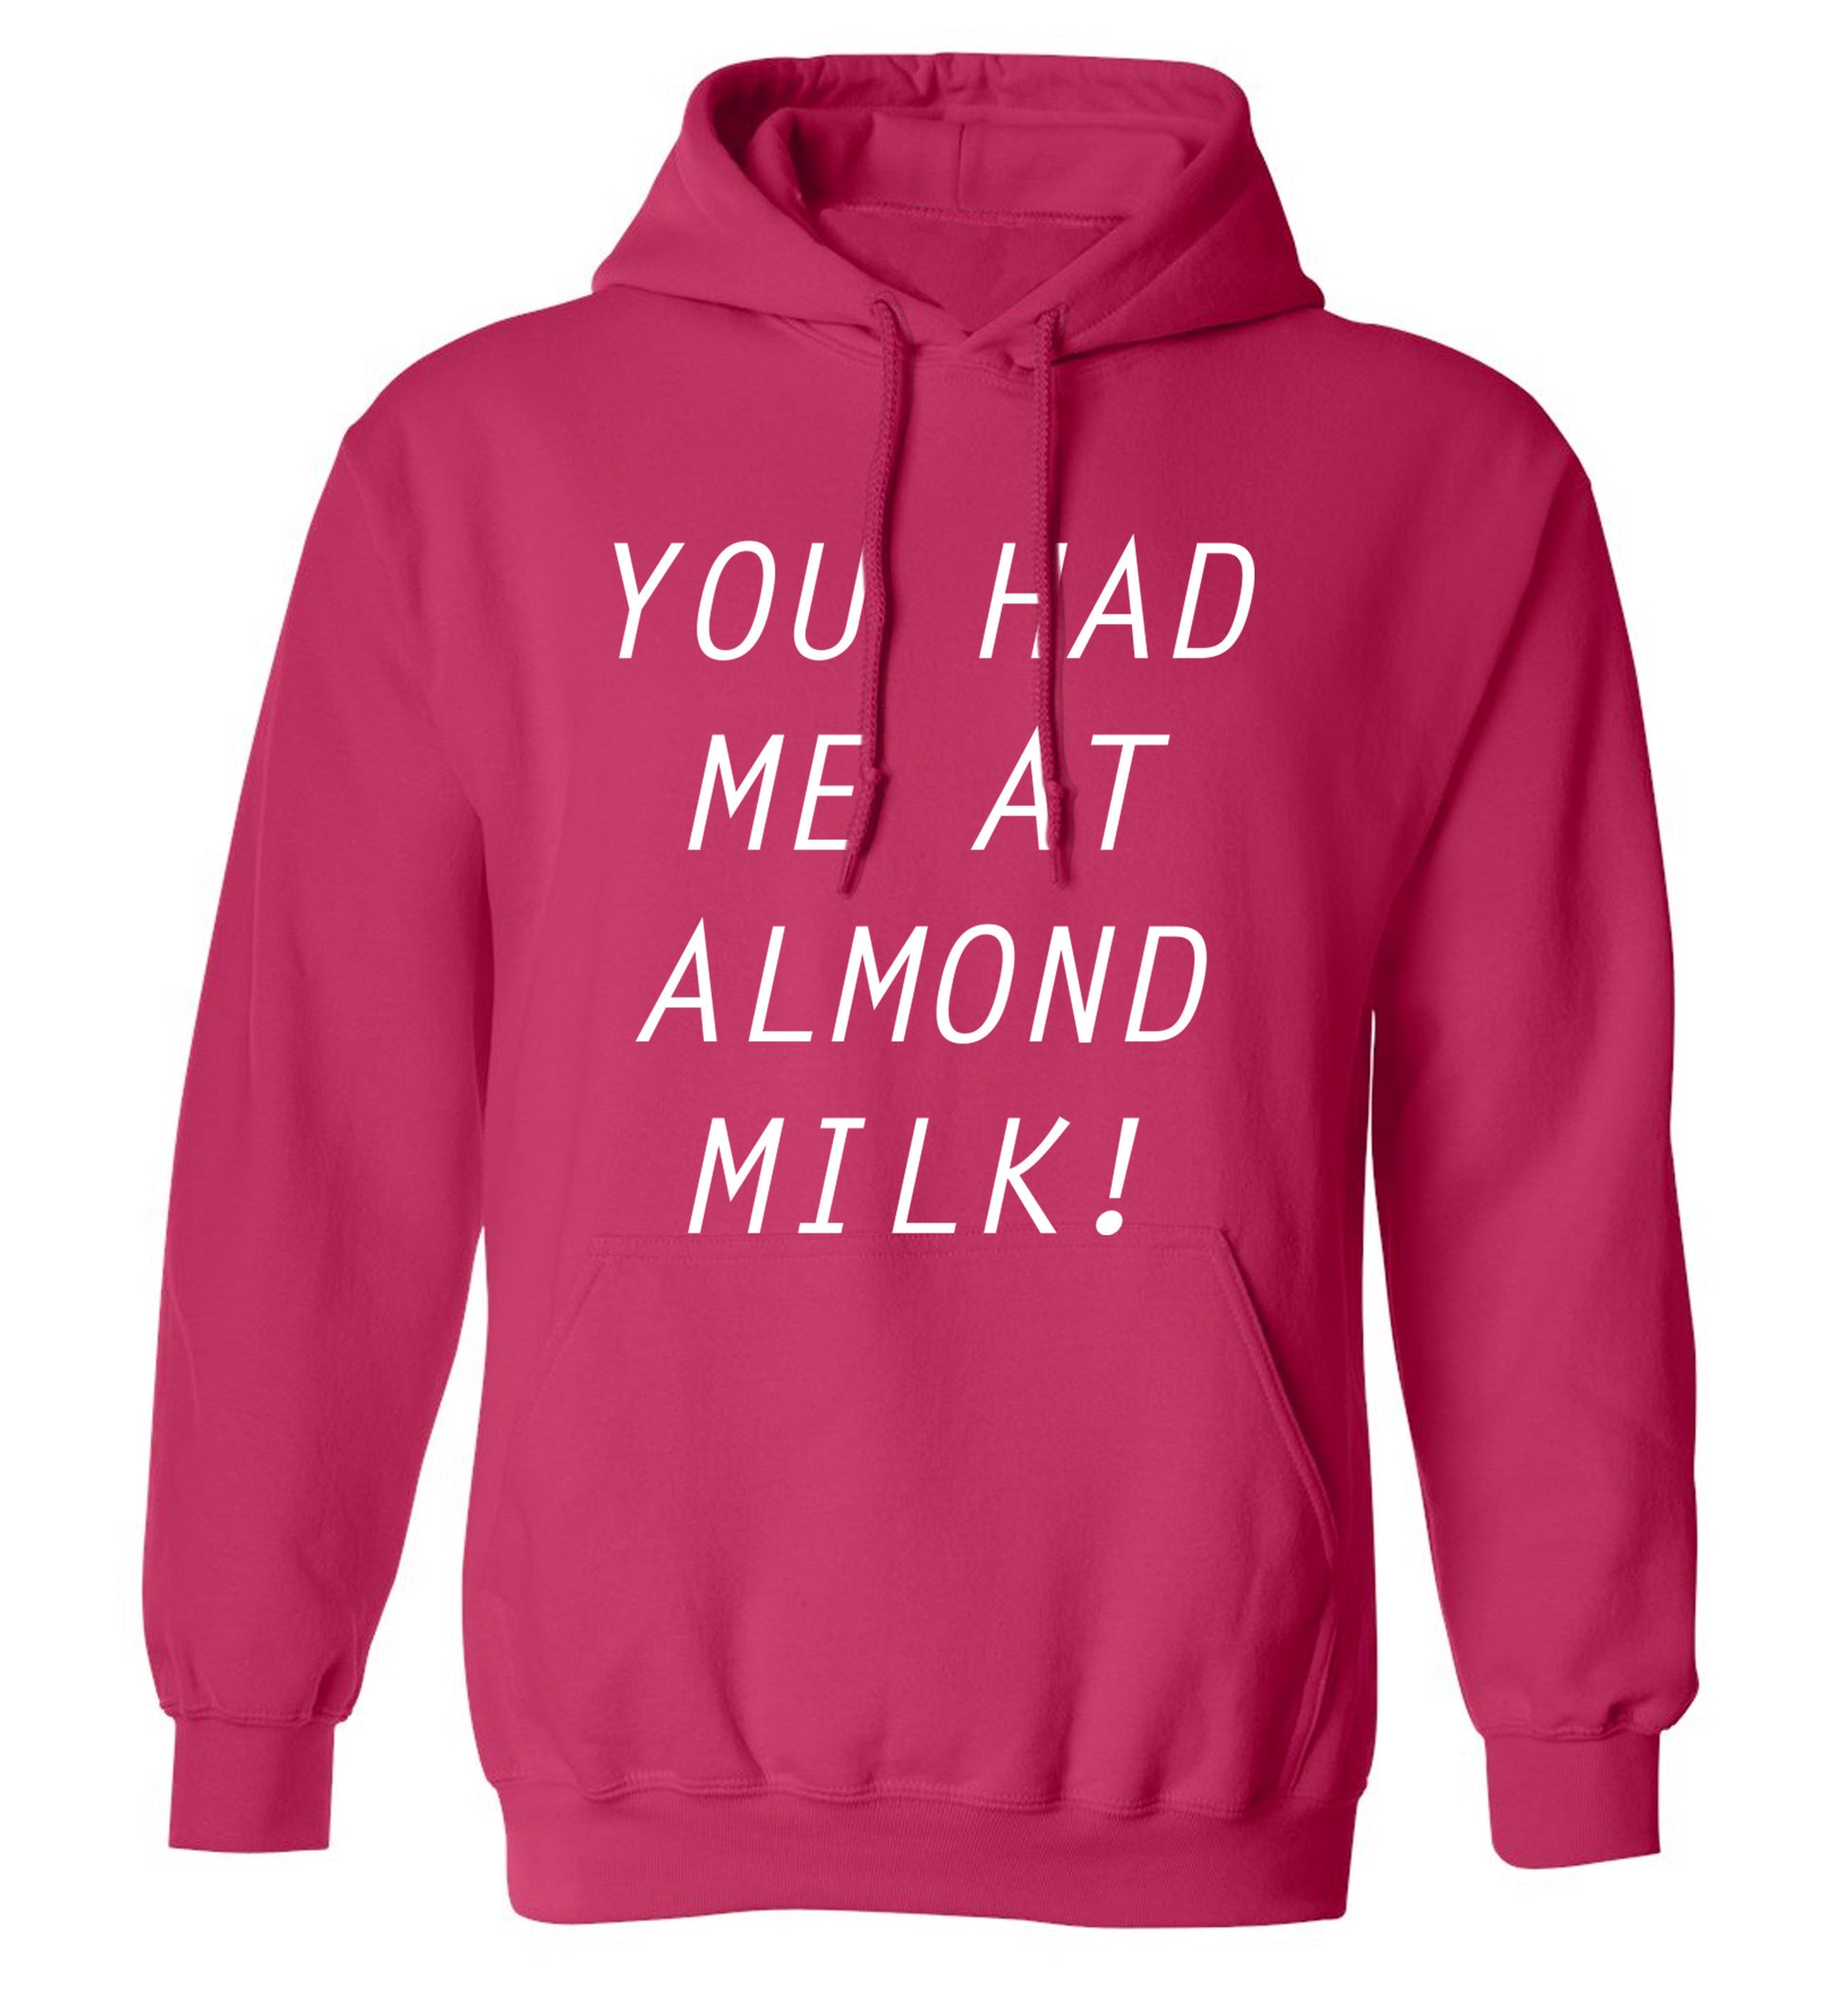 You had me at almond milk adults unisex pink hoodie 2XL